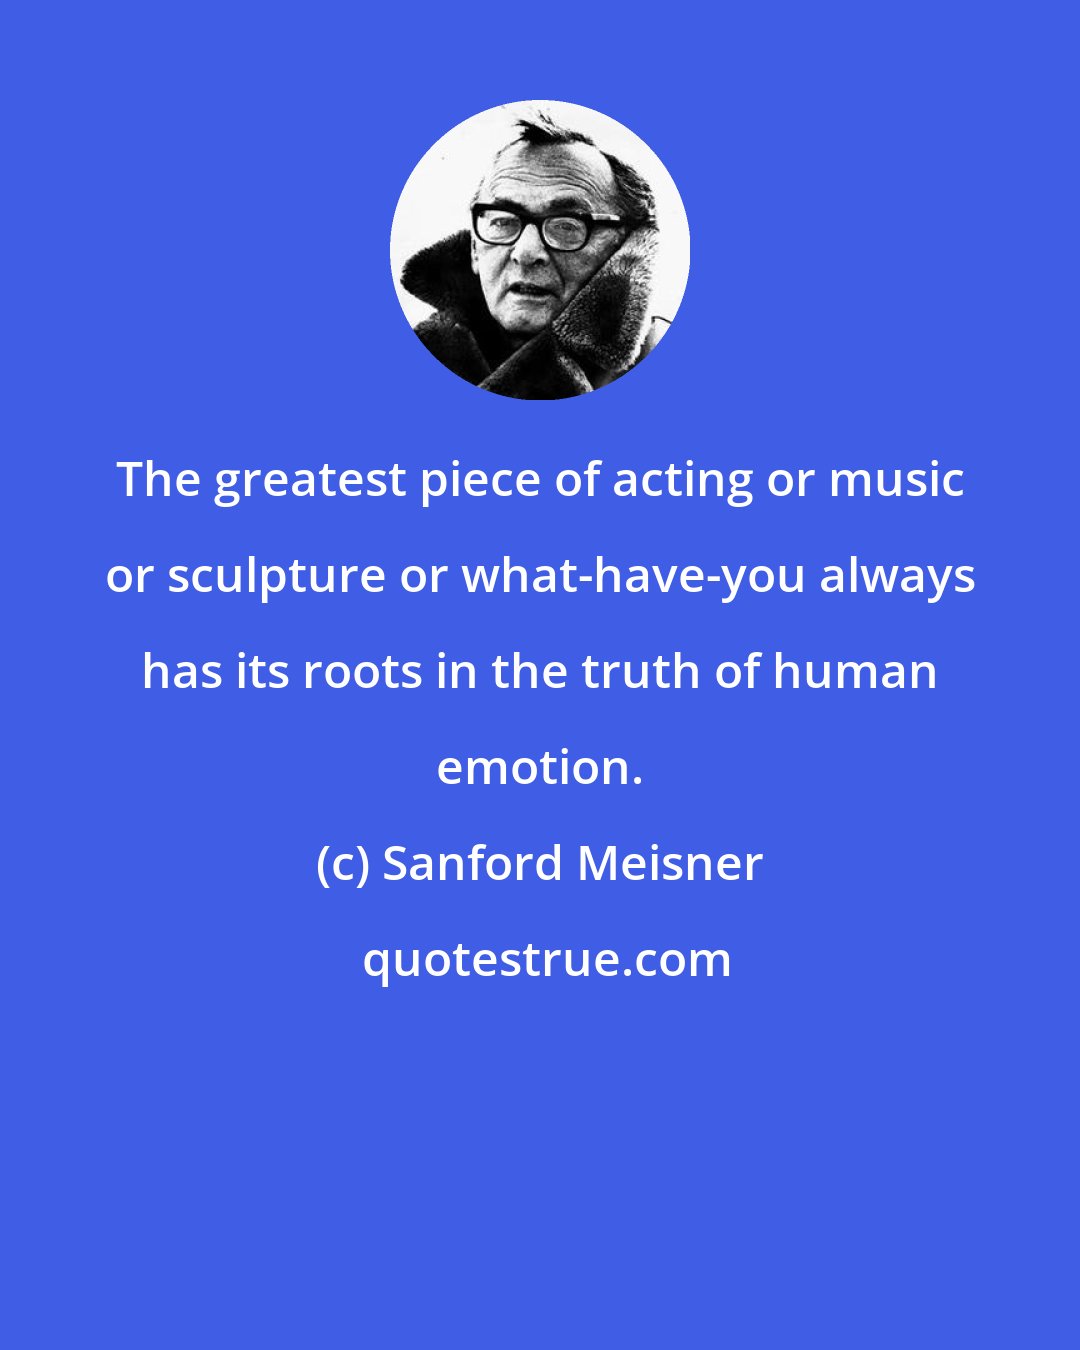 Sanford Meisner: The greatest piece of acting or music or sculpture or what-have-you always has its roots in the truth of human emotion.